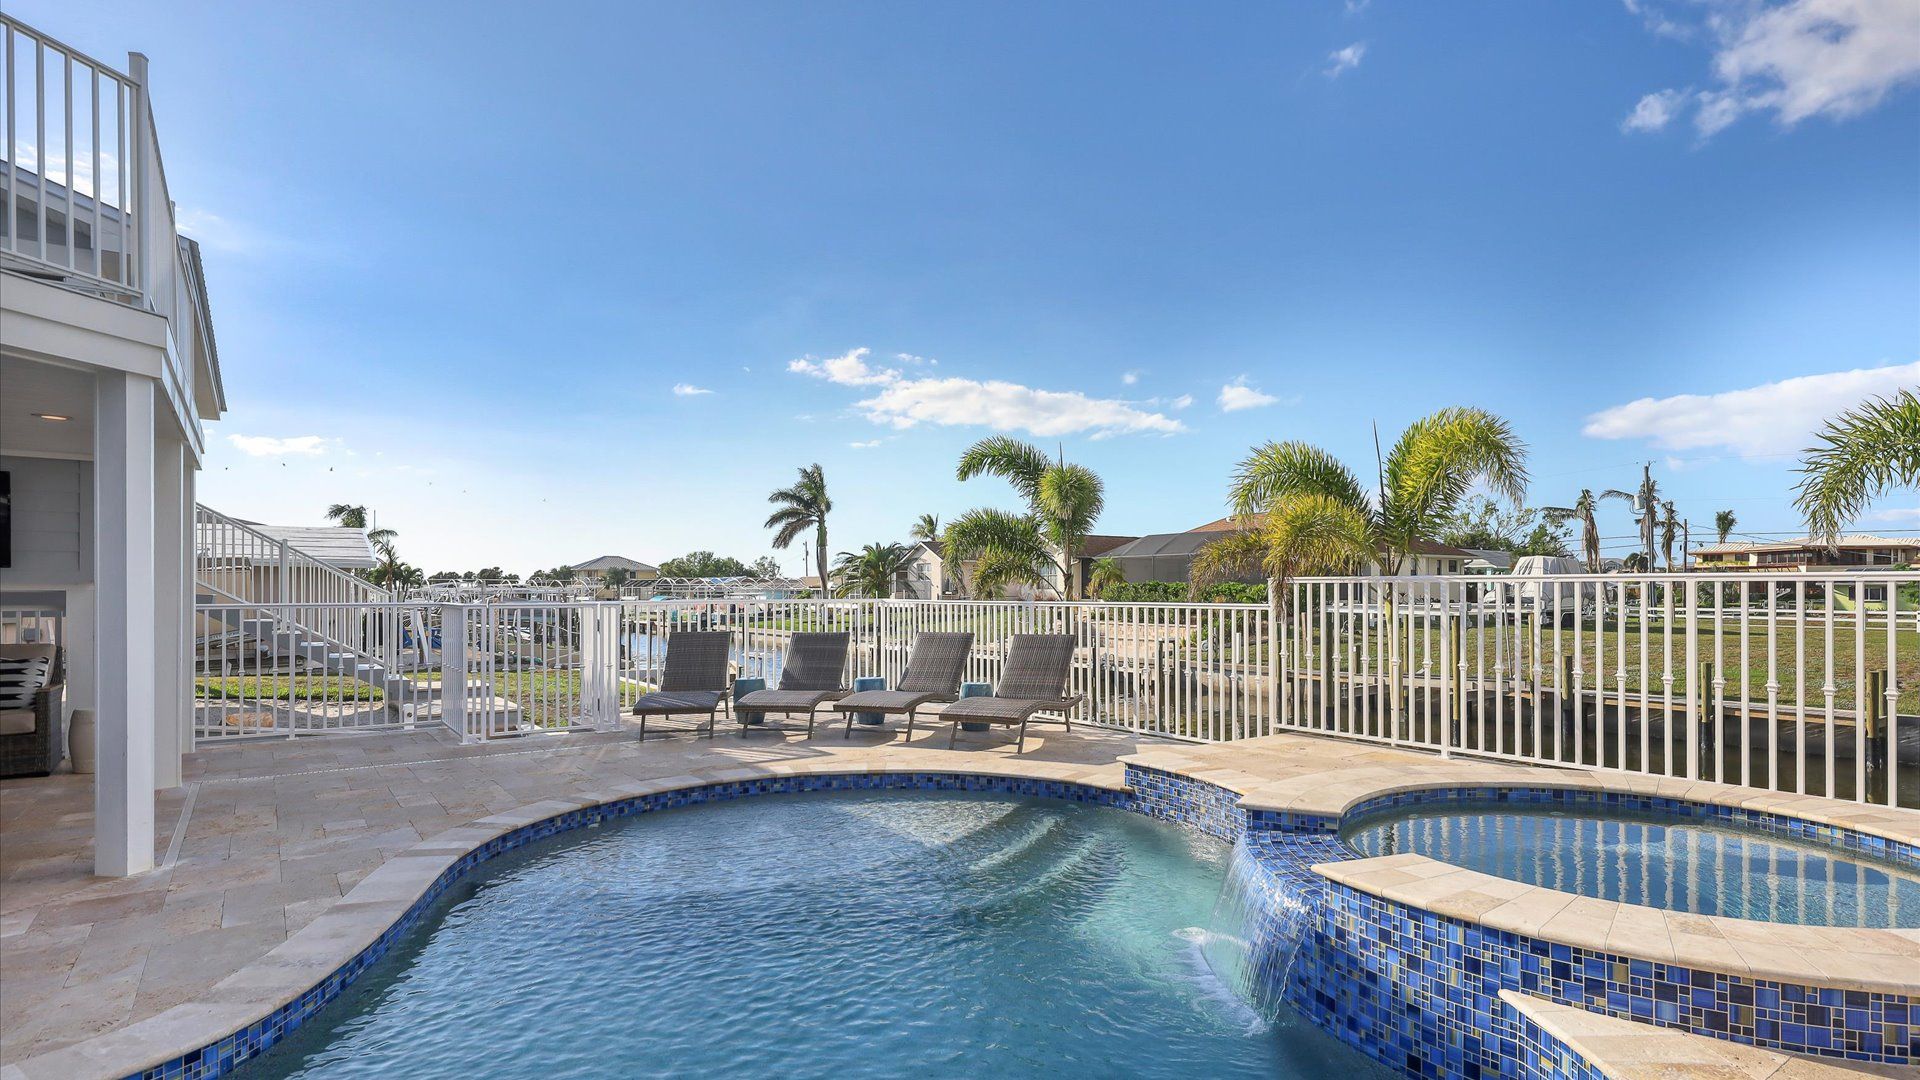 Gorgeous pool overlooks the canal and Lemon Bay